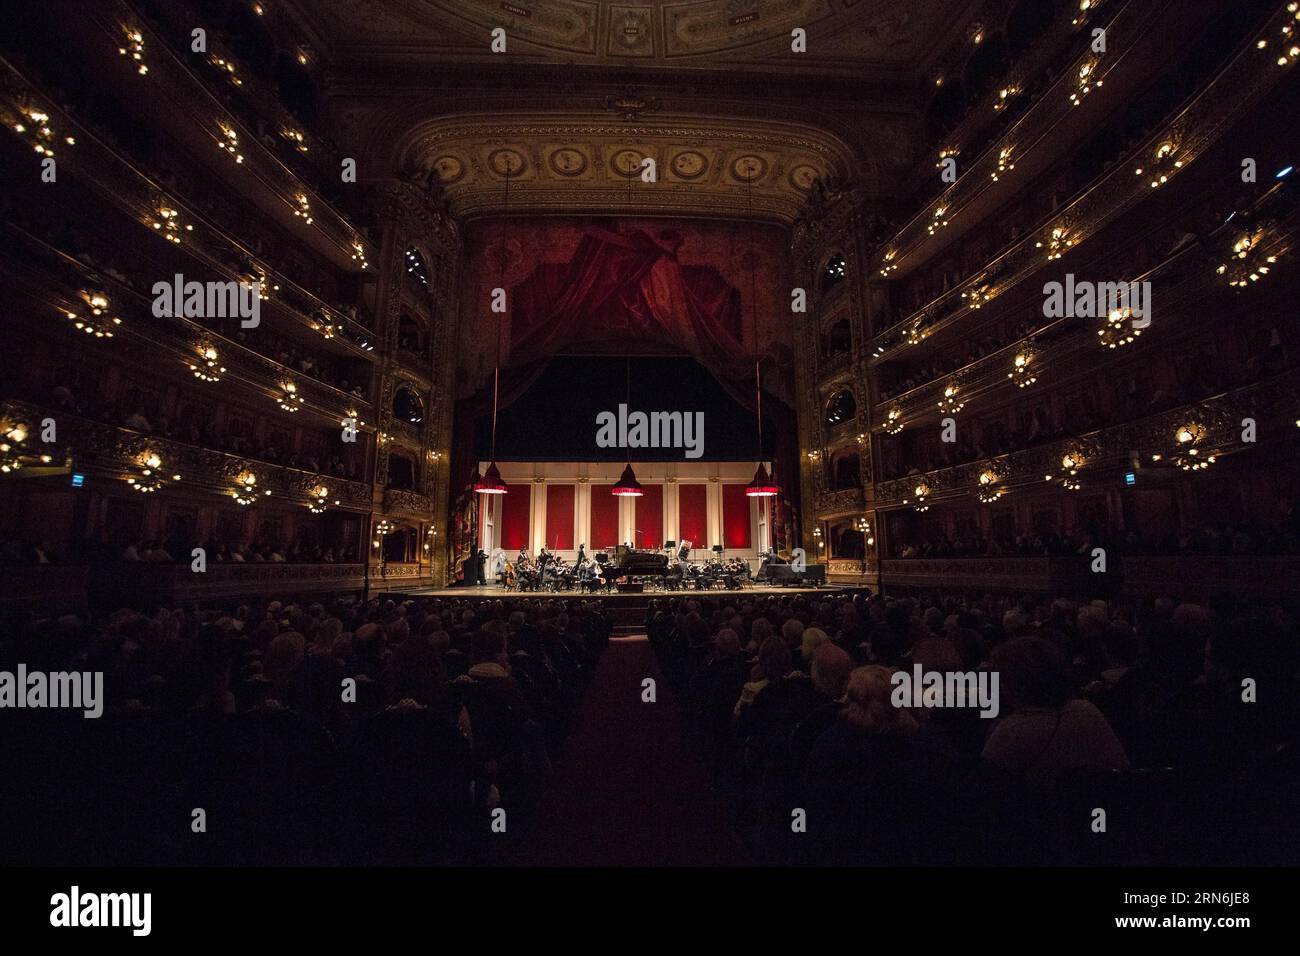 BUENOS AIRES, July 29, 2015 -- Argentinean musician and orchestra conductor Daniel Barenboim and pianist Martha Argerich perform at a concert held with the West-Eastern Divan Orchestra at the Colon Theater, in Buenos Aires, capital of Argentina, July 29, 2015.  jp ARGENTINA-BUENOS AIRES-MUSIC-CONCERT MARTINxZABALA PUBLICATIONxNOTxINxCHN Stock Photo